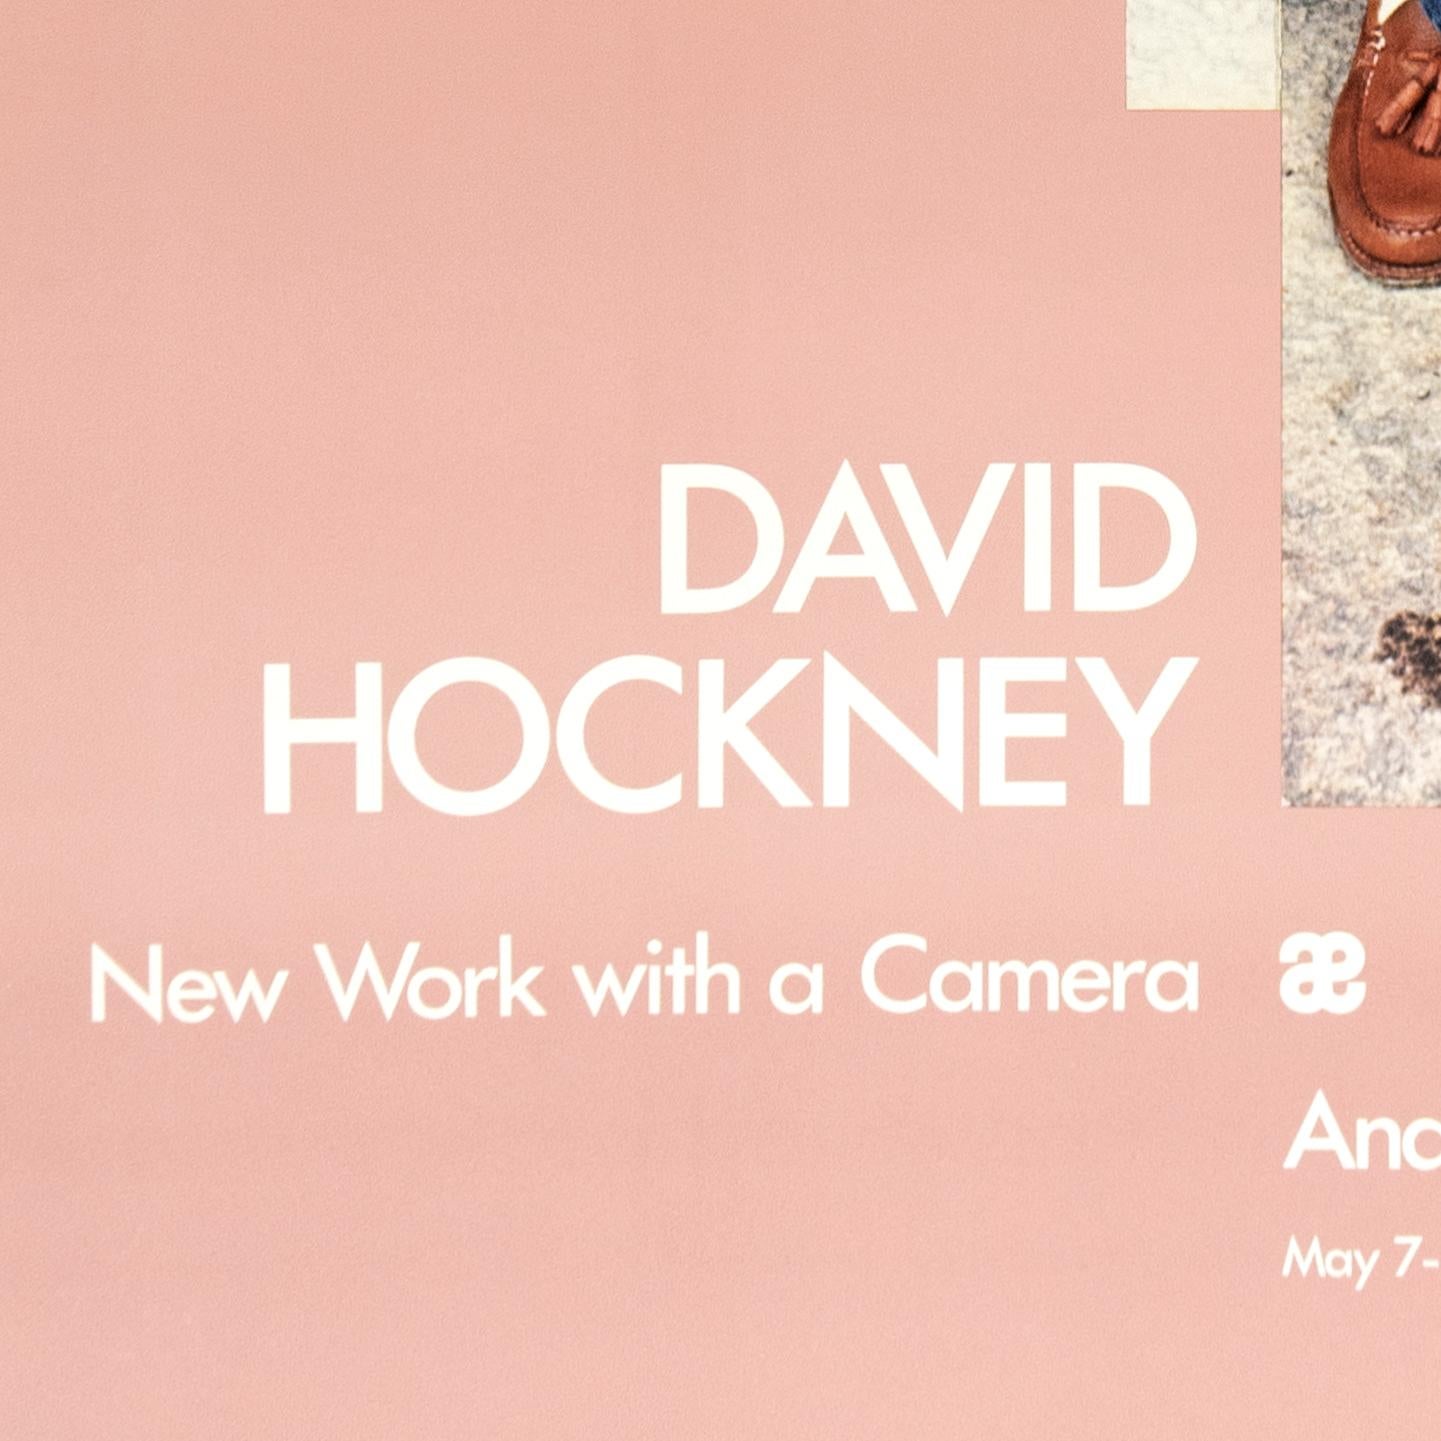 Exhibition Poster Gregory Loading His Camera 1983 in vintage millennial pink - Beige Portrait Print by (after) David Hockney